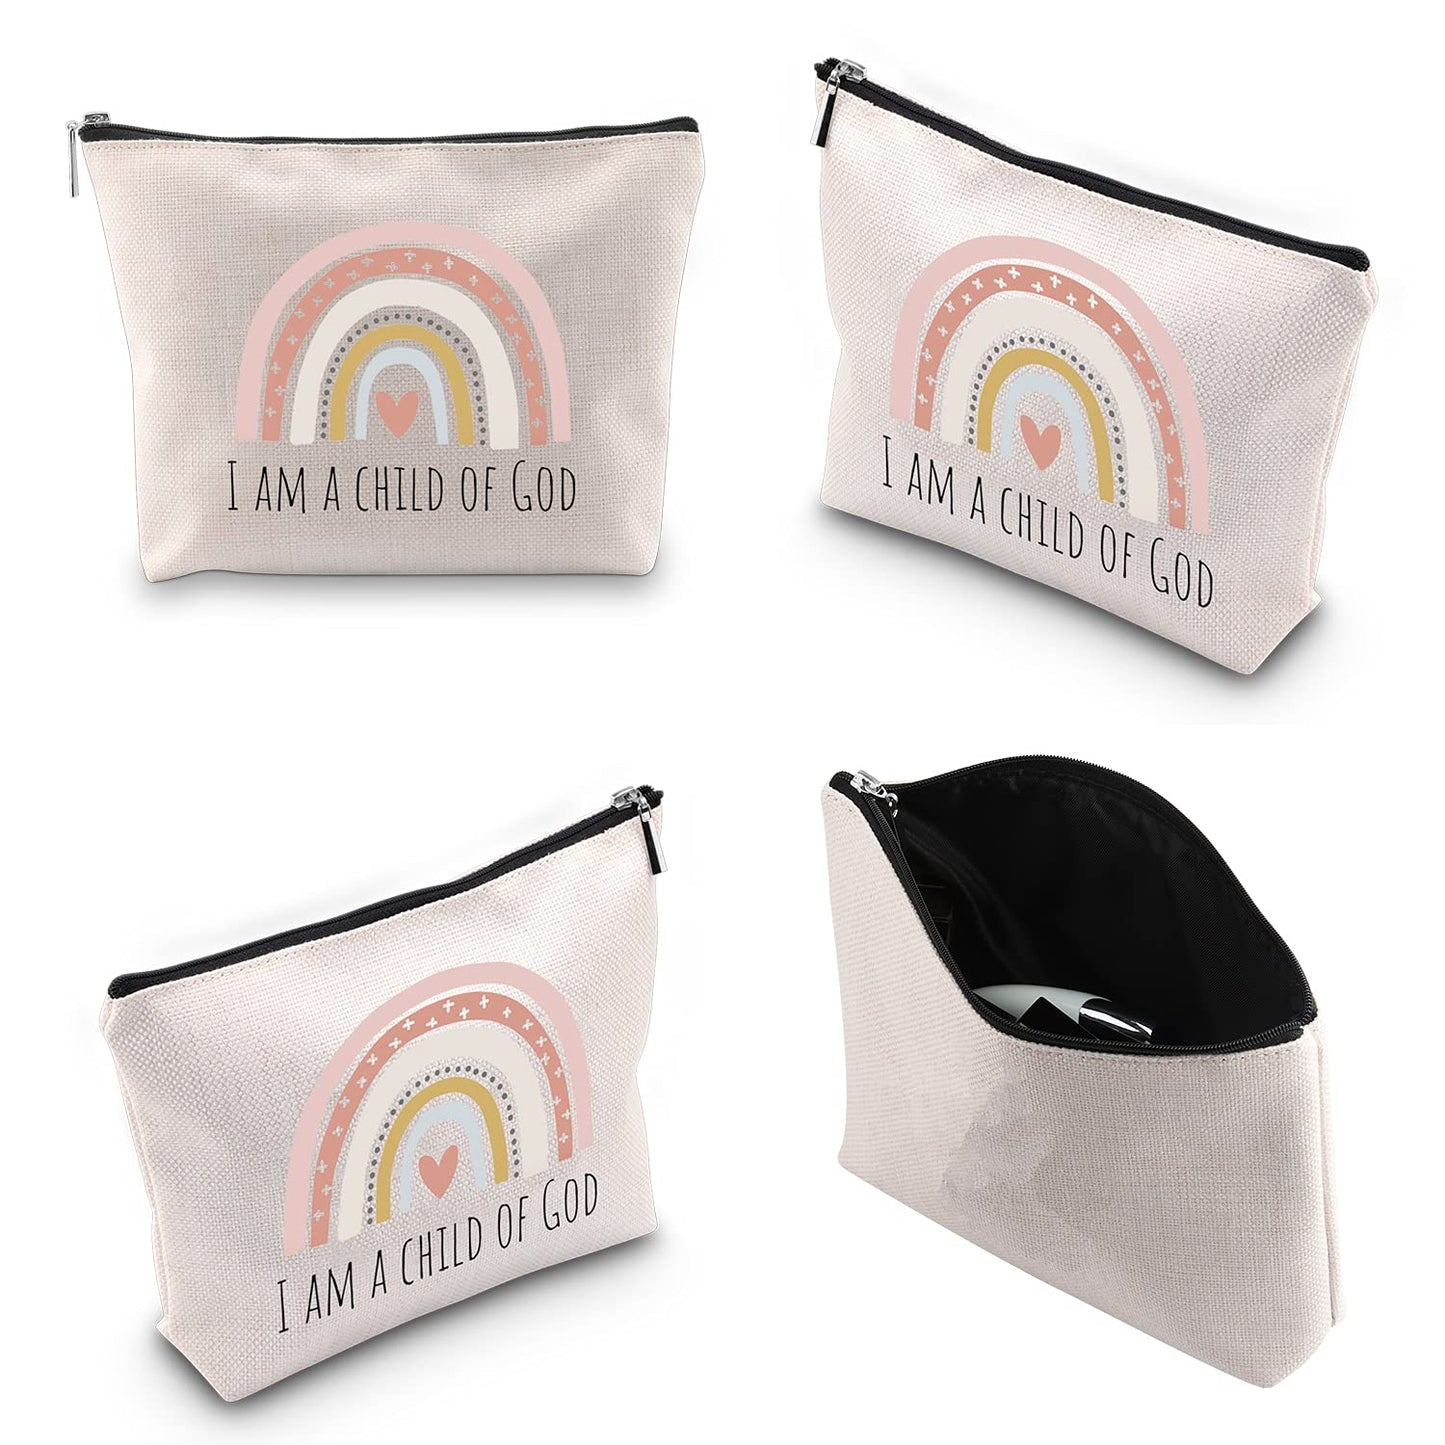 WCGXKO Religious Cosmetic Case 'I am a Child of God' for First Communion, Baptism Gifts, Travel, Organizer